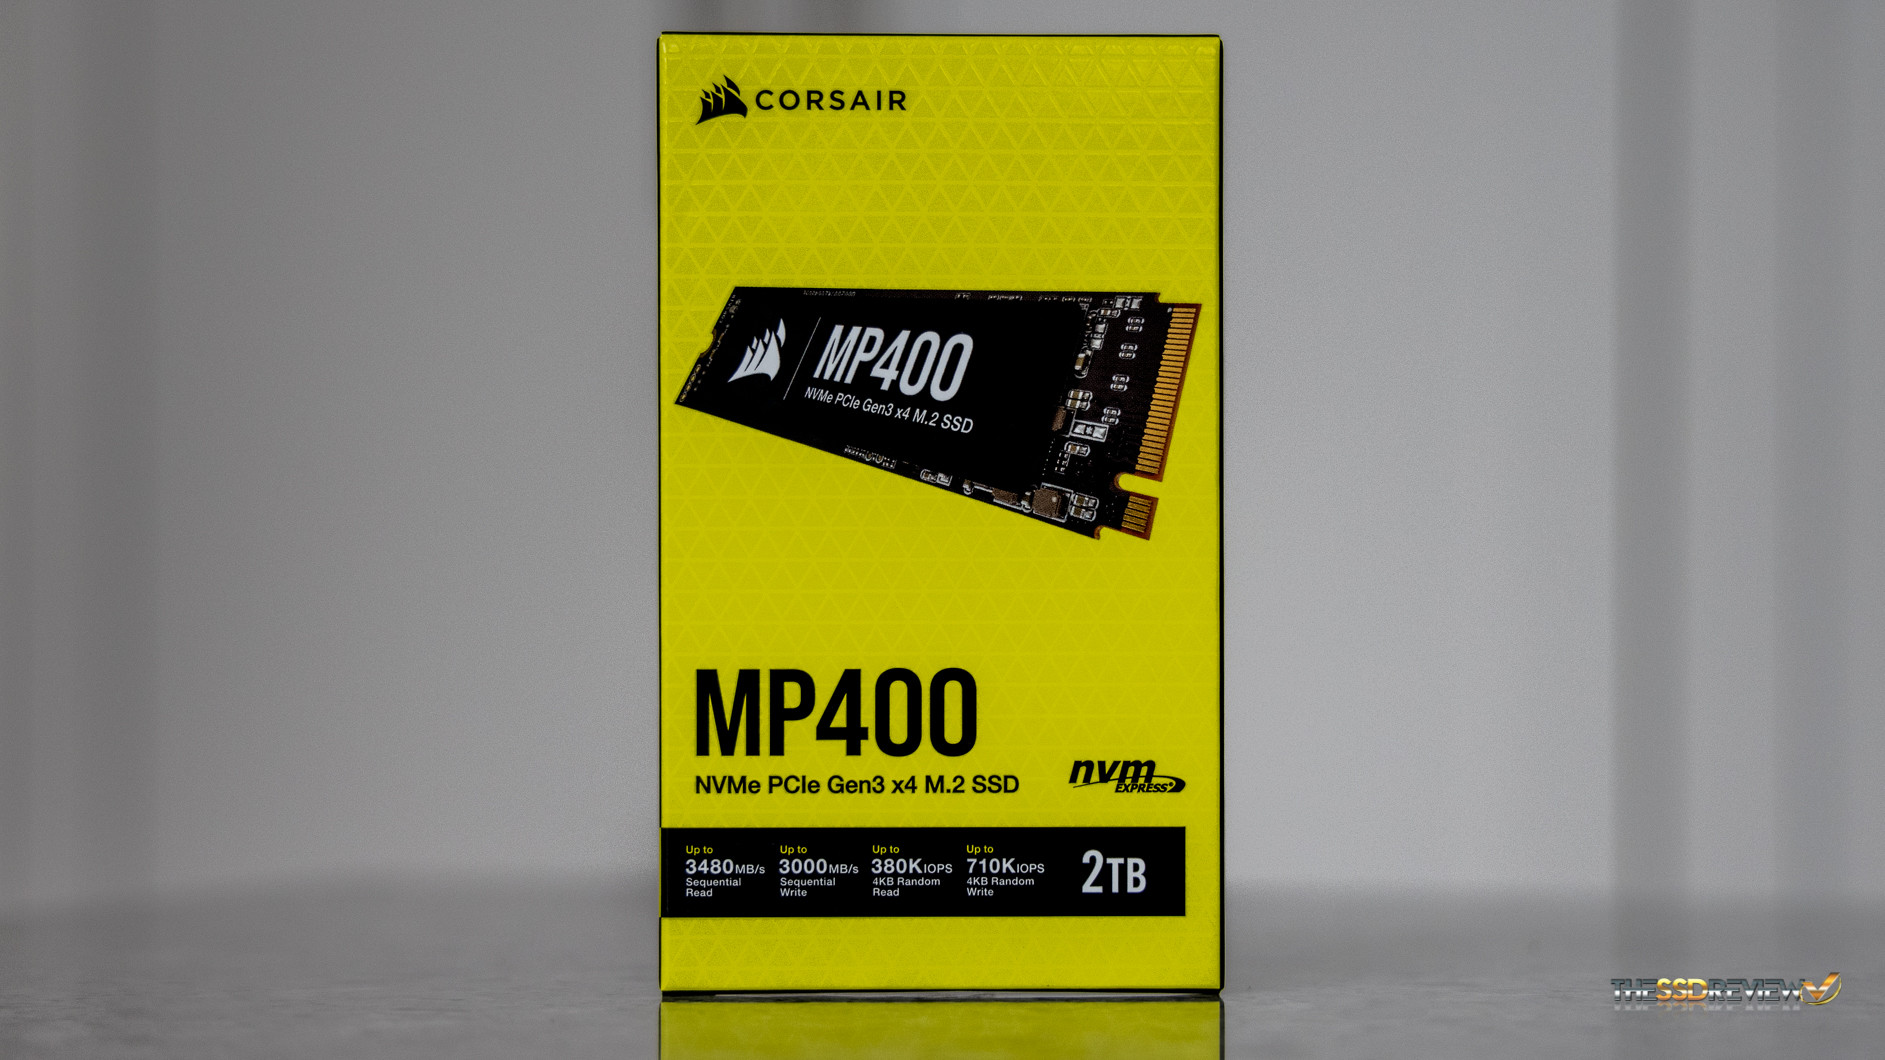 Corsair MP400 2TB NVMe SSD - QLC NAND Goes Mainstream | The SSD Review